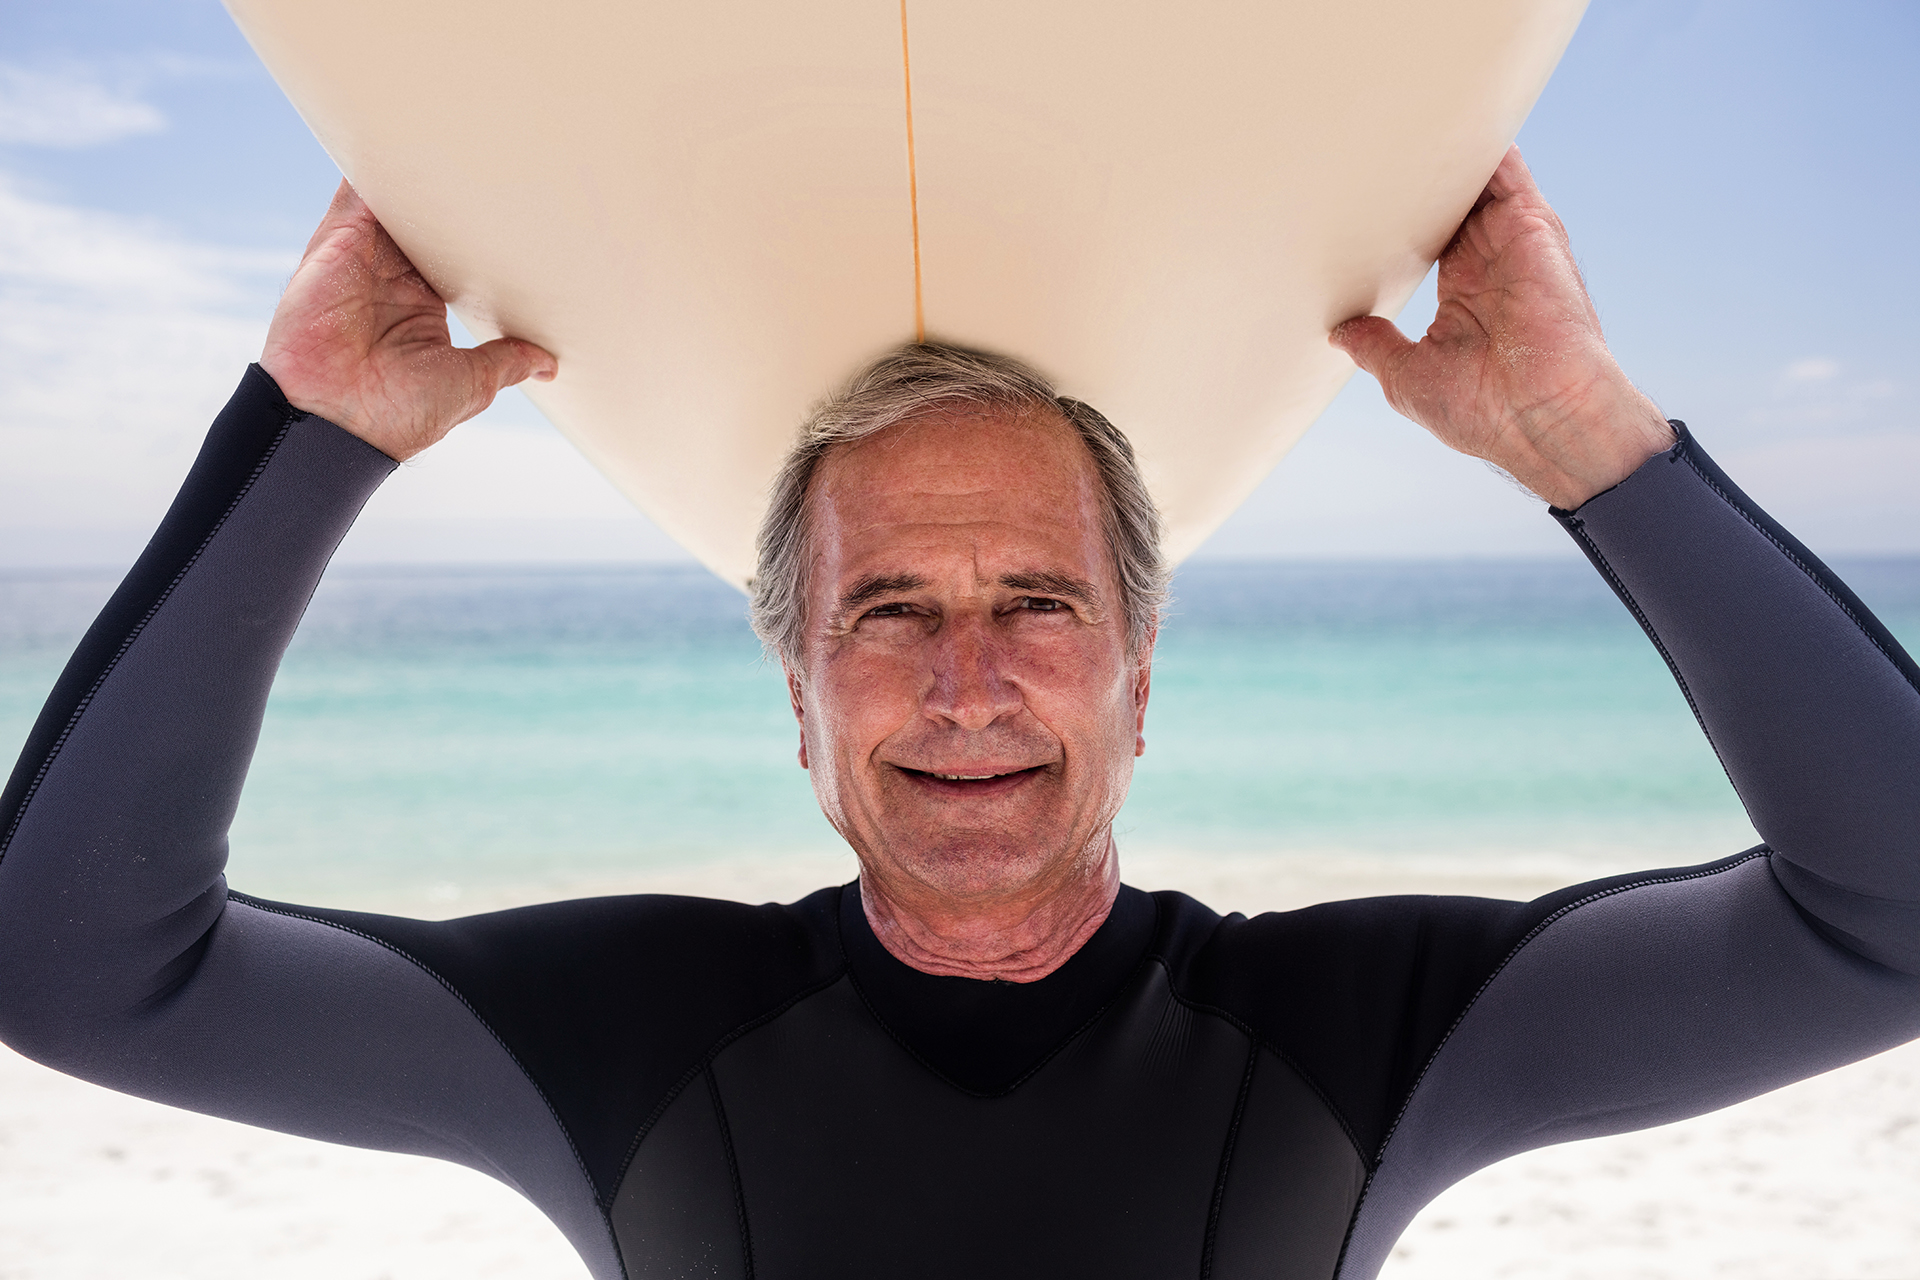 Portrait of senior man holding a surfboard over his head on the beach